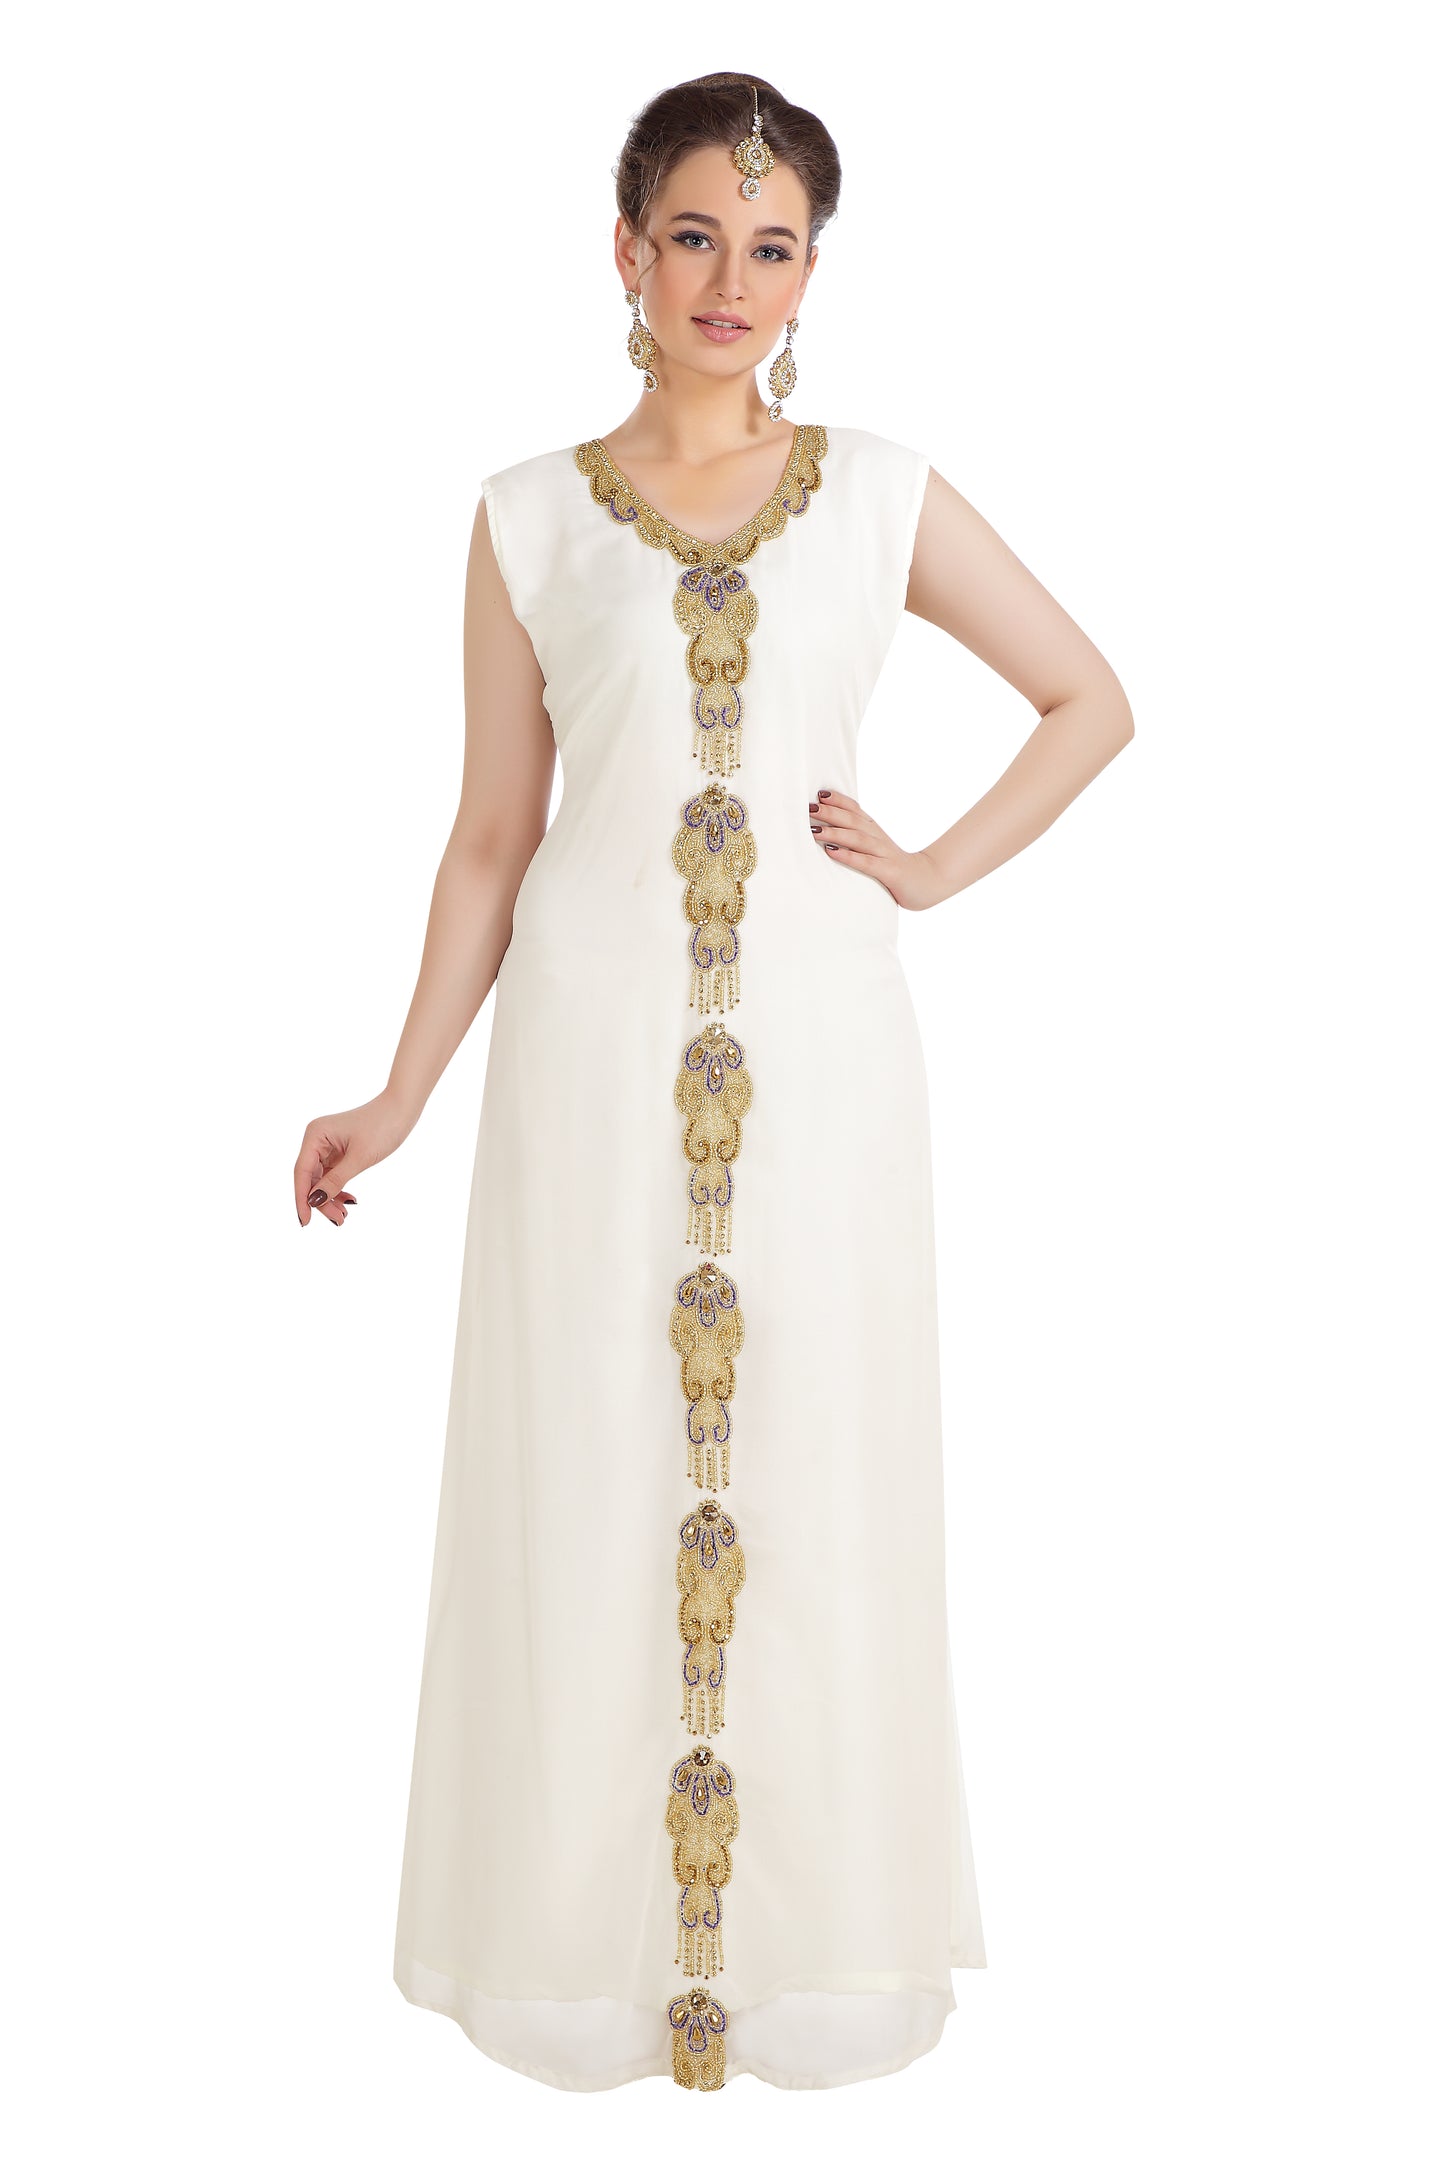 Load image into Gallery viewer, Sleeveless Maxi Colorful Hand Embroidered HomeGown - Maxim Creation
